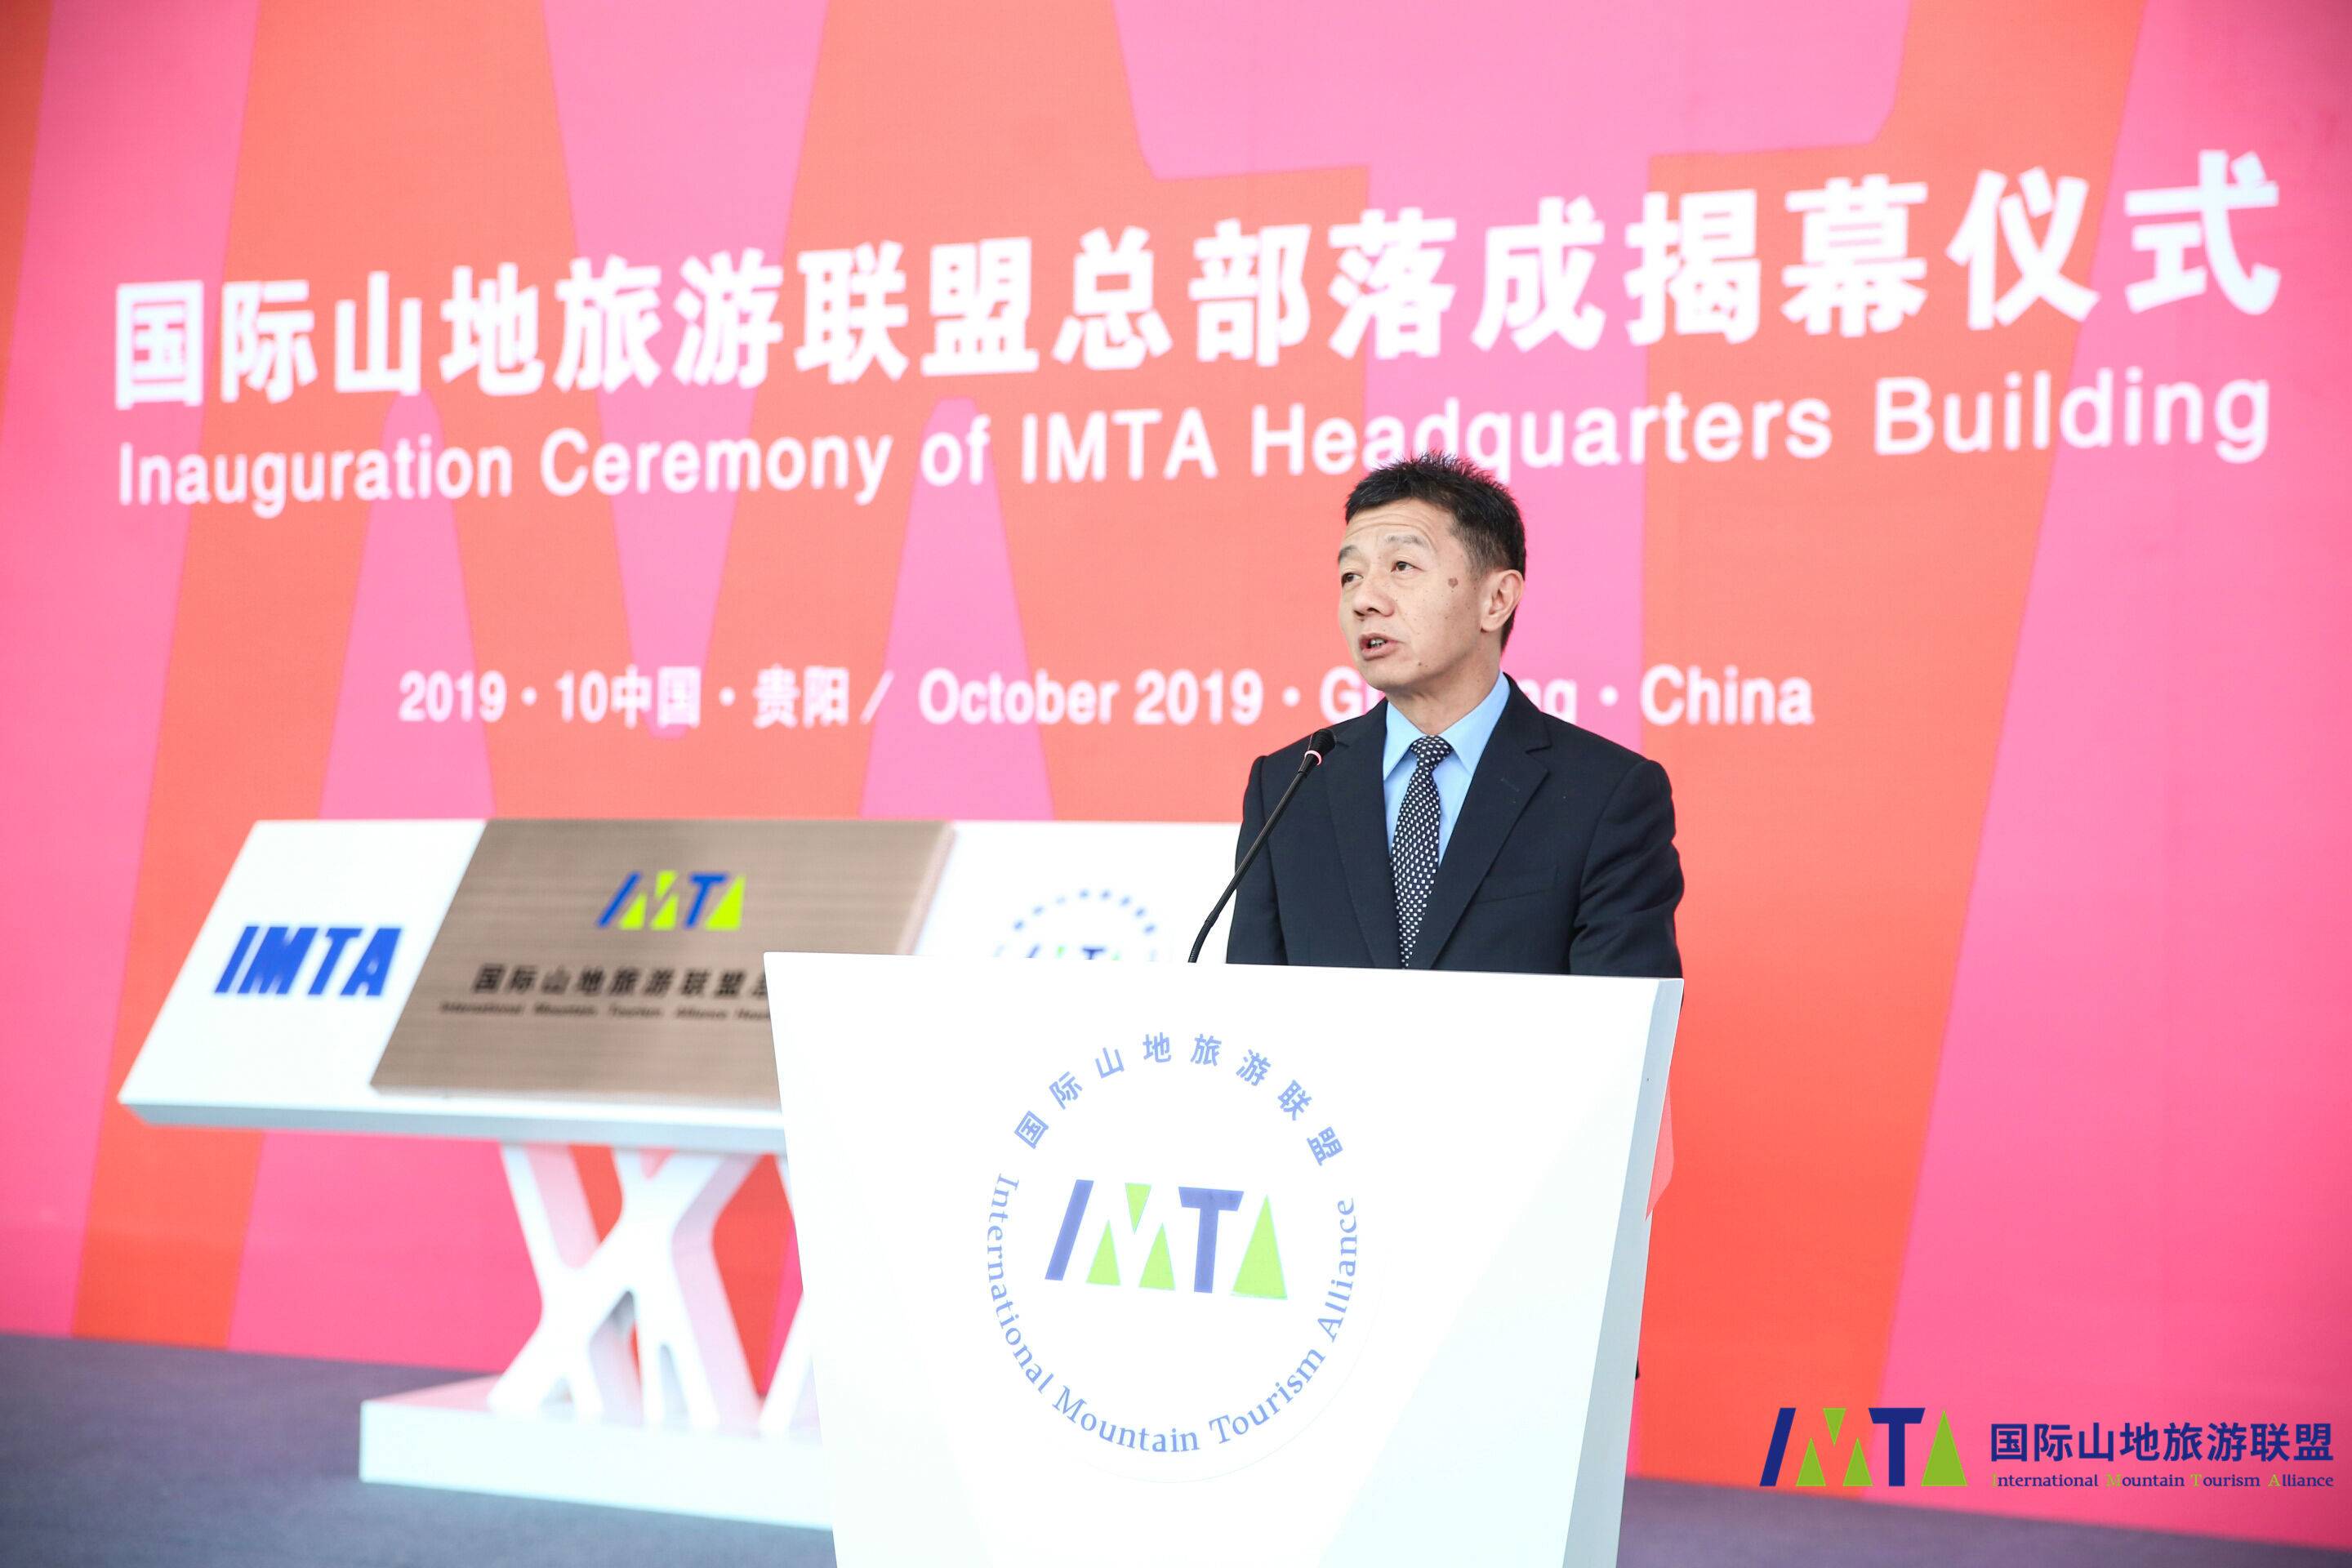 Chen Yan, Mayor of Guiyang Municipal Government, addresses at the Inaugural Ceremony of the Headquarters Building of the International Mountain Tourism Alliance